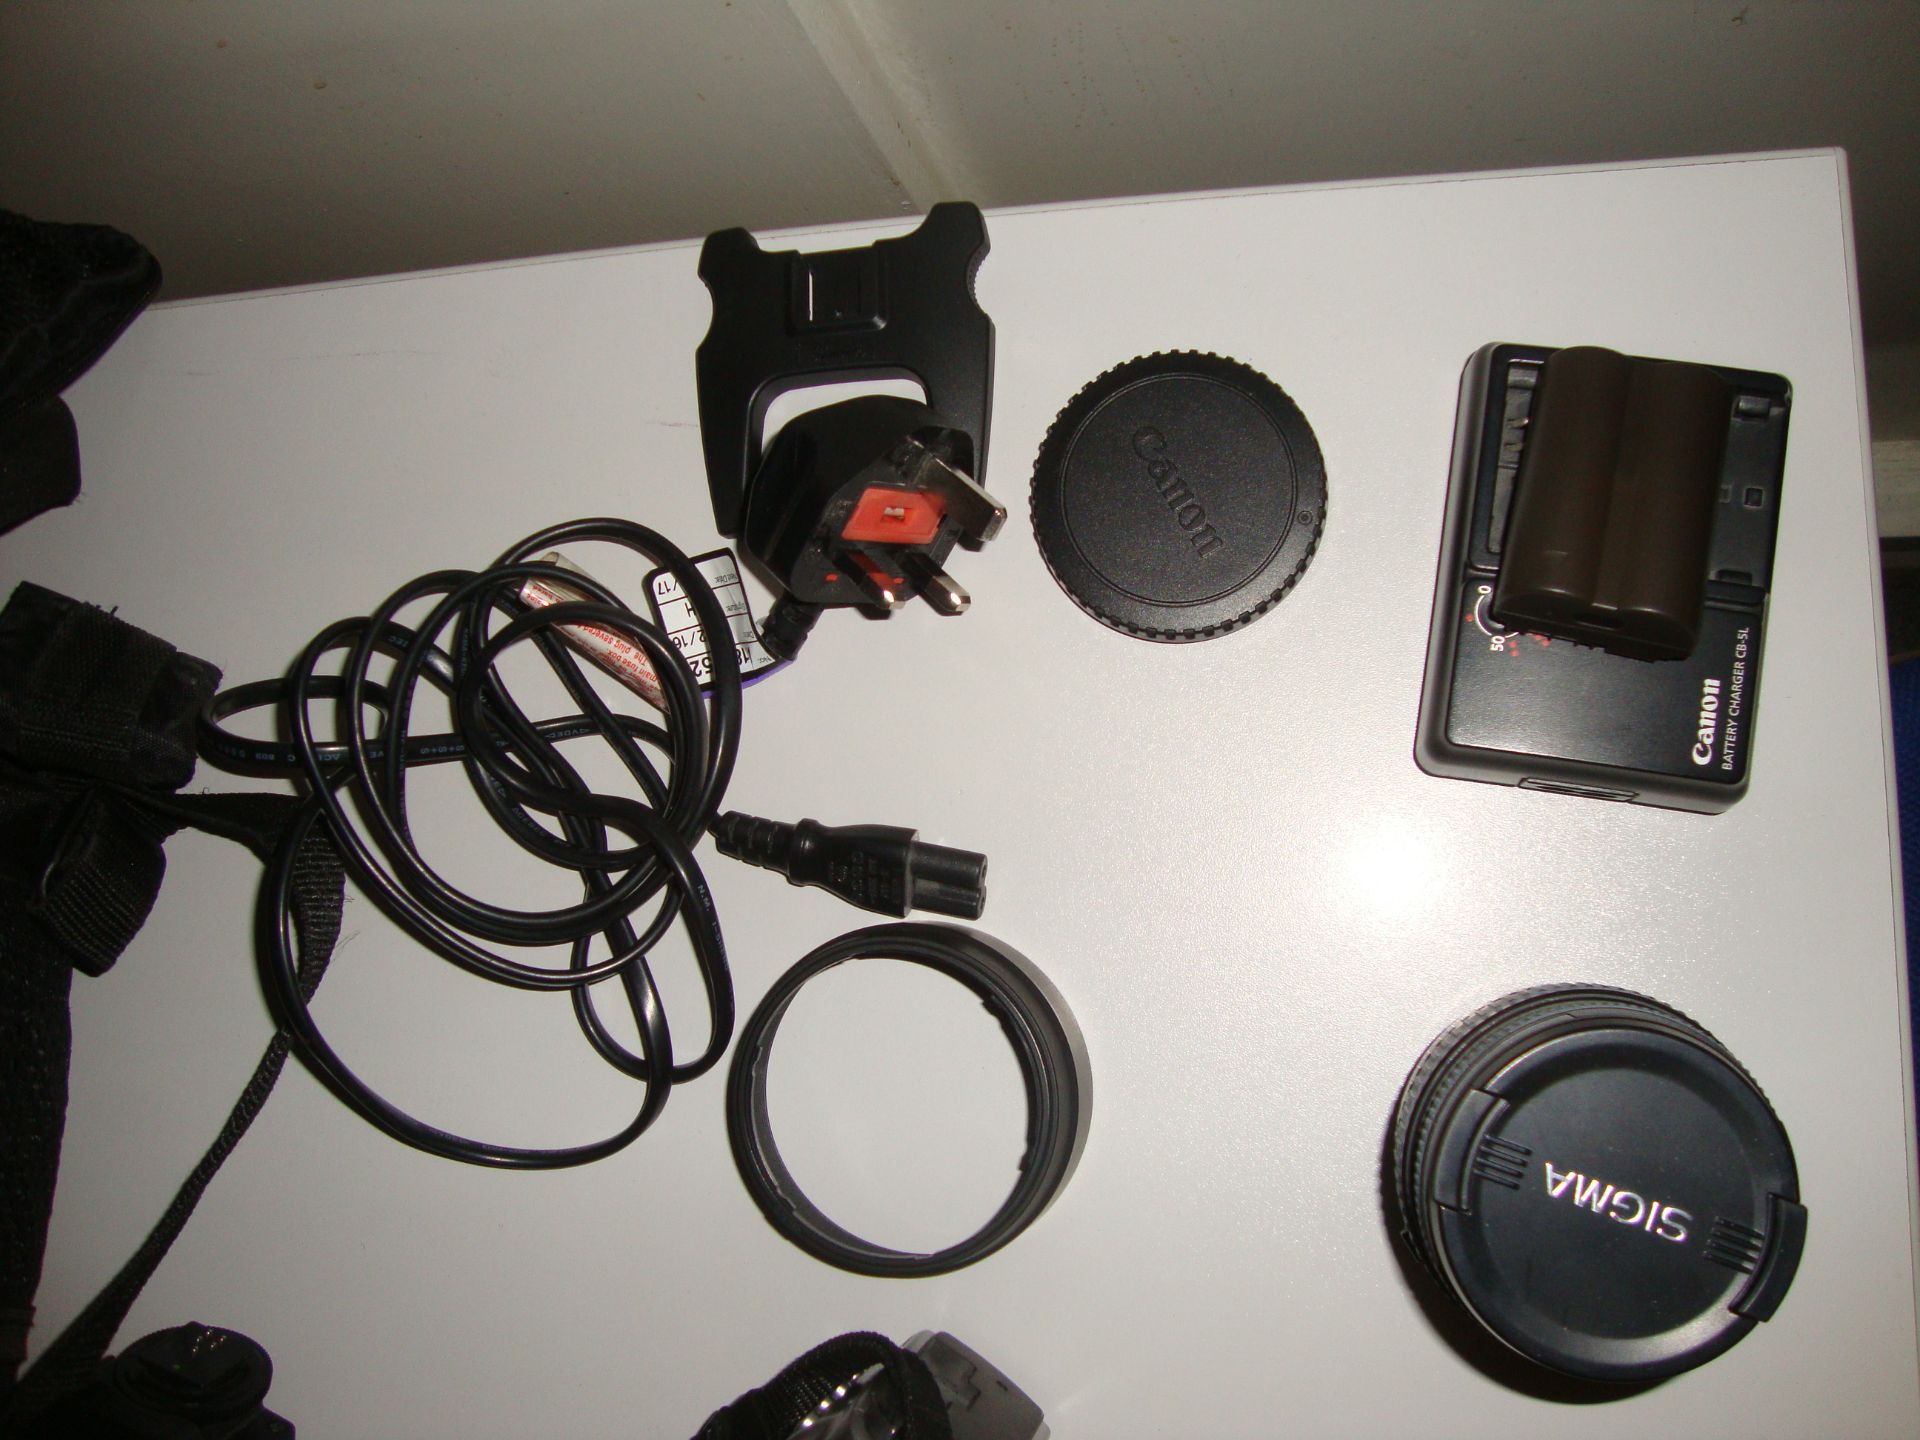 Canon 300D EOS digital SLR camera and lenses - Image 5 of 9